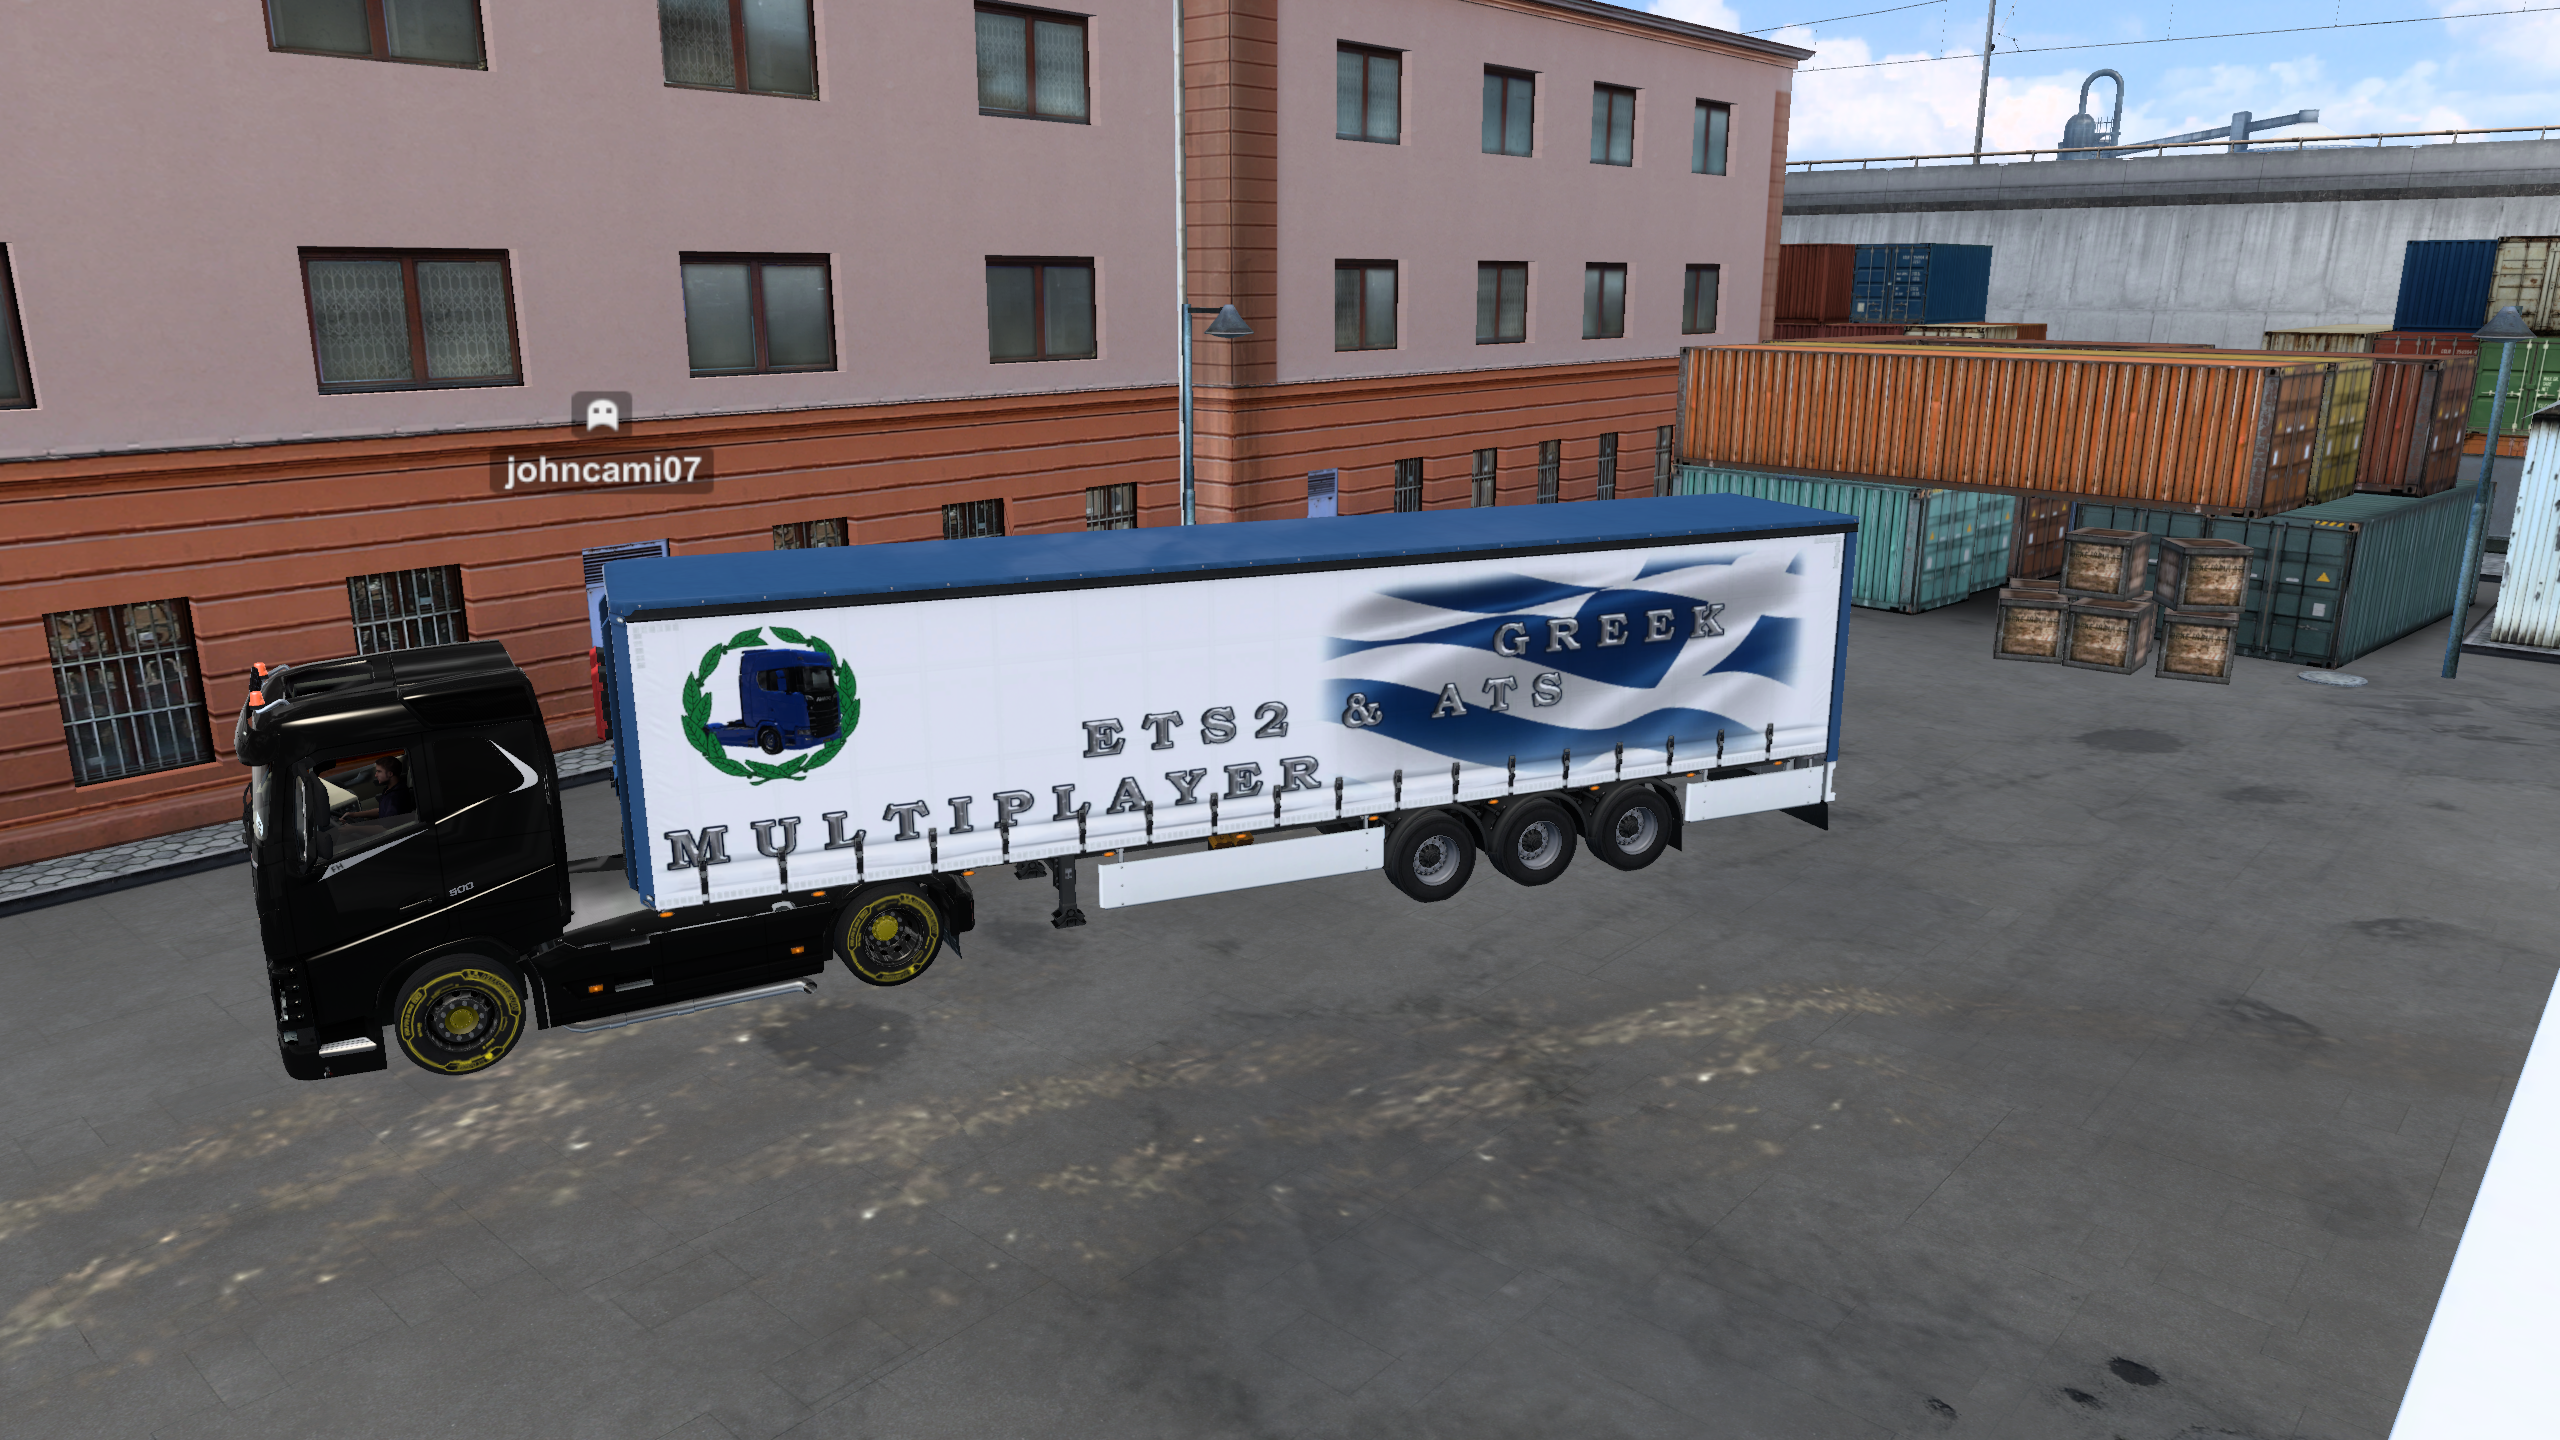 ets2_20220223_222031_00.png